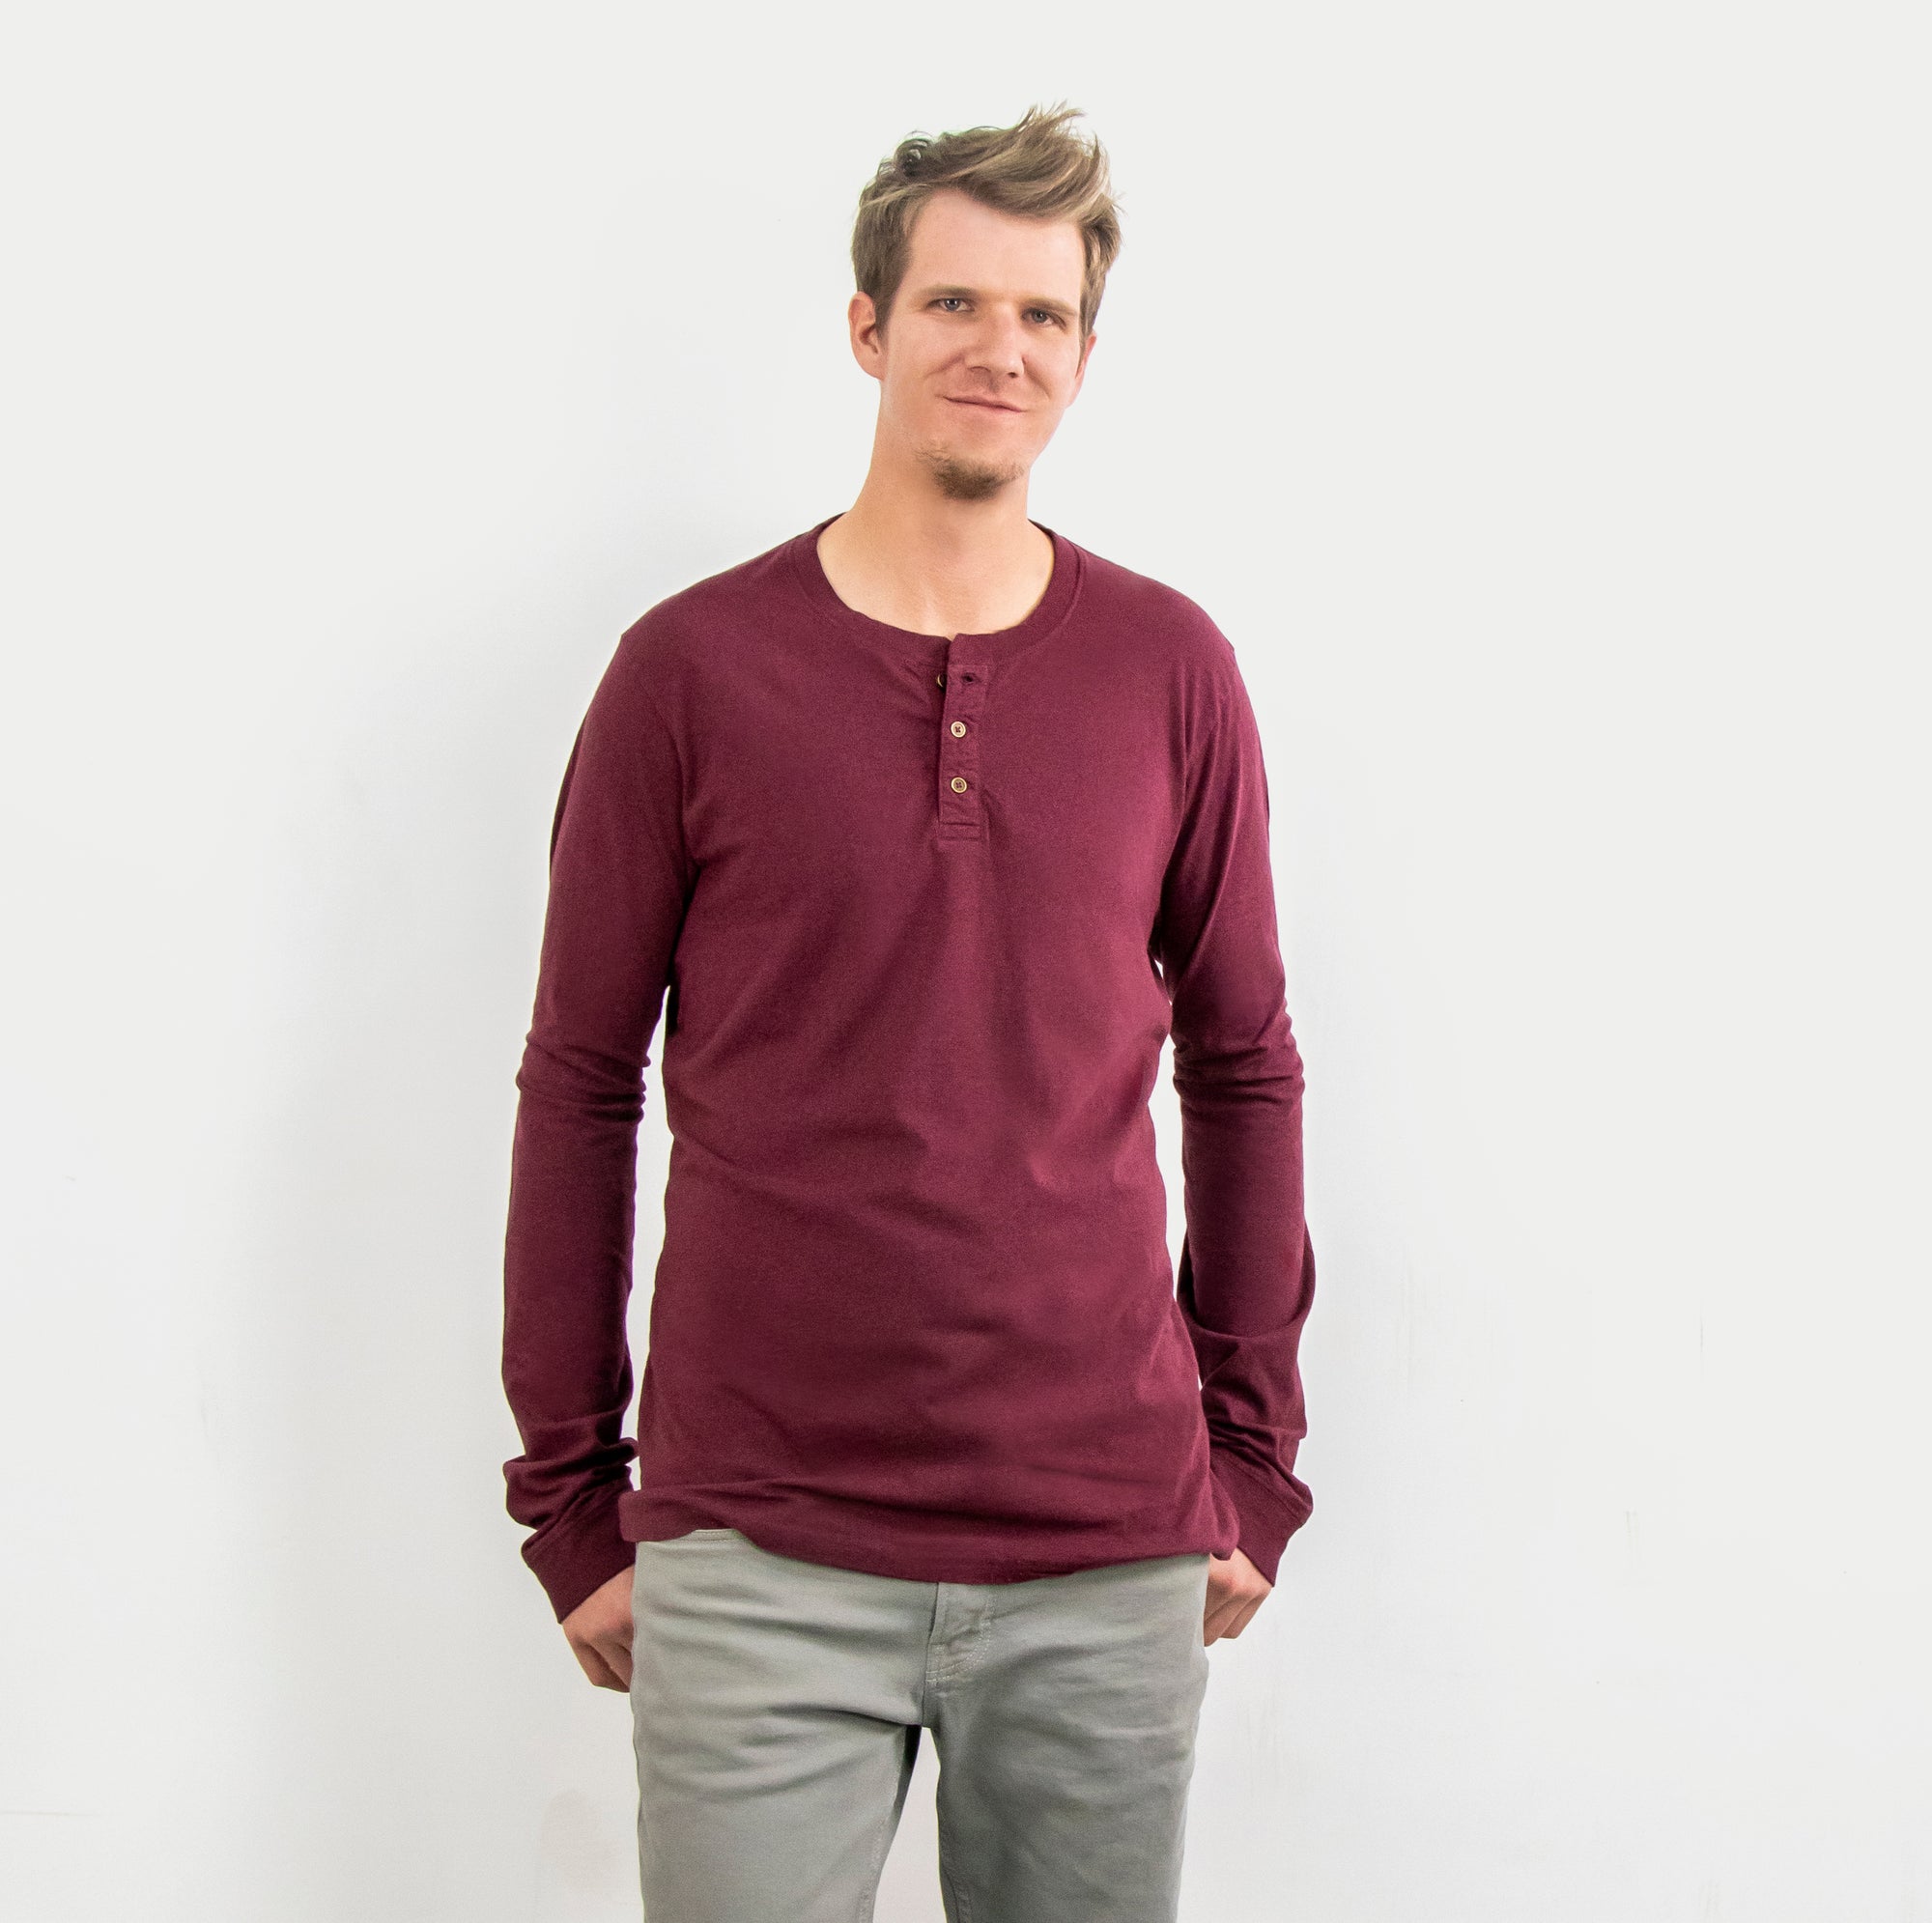 How To Wear Henley Shirts | lupon.gov.ph